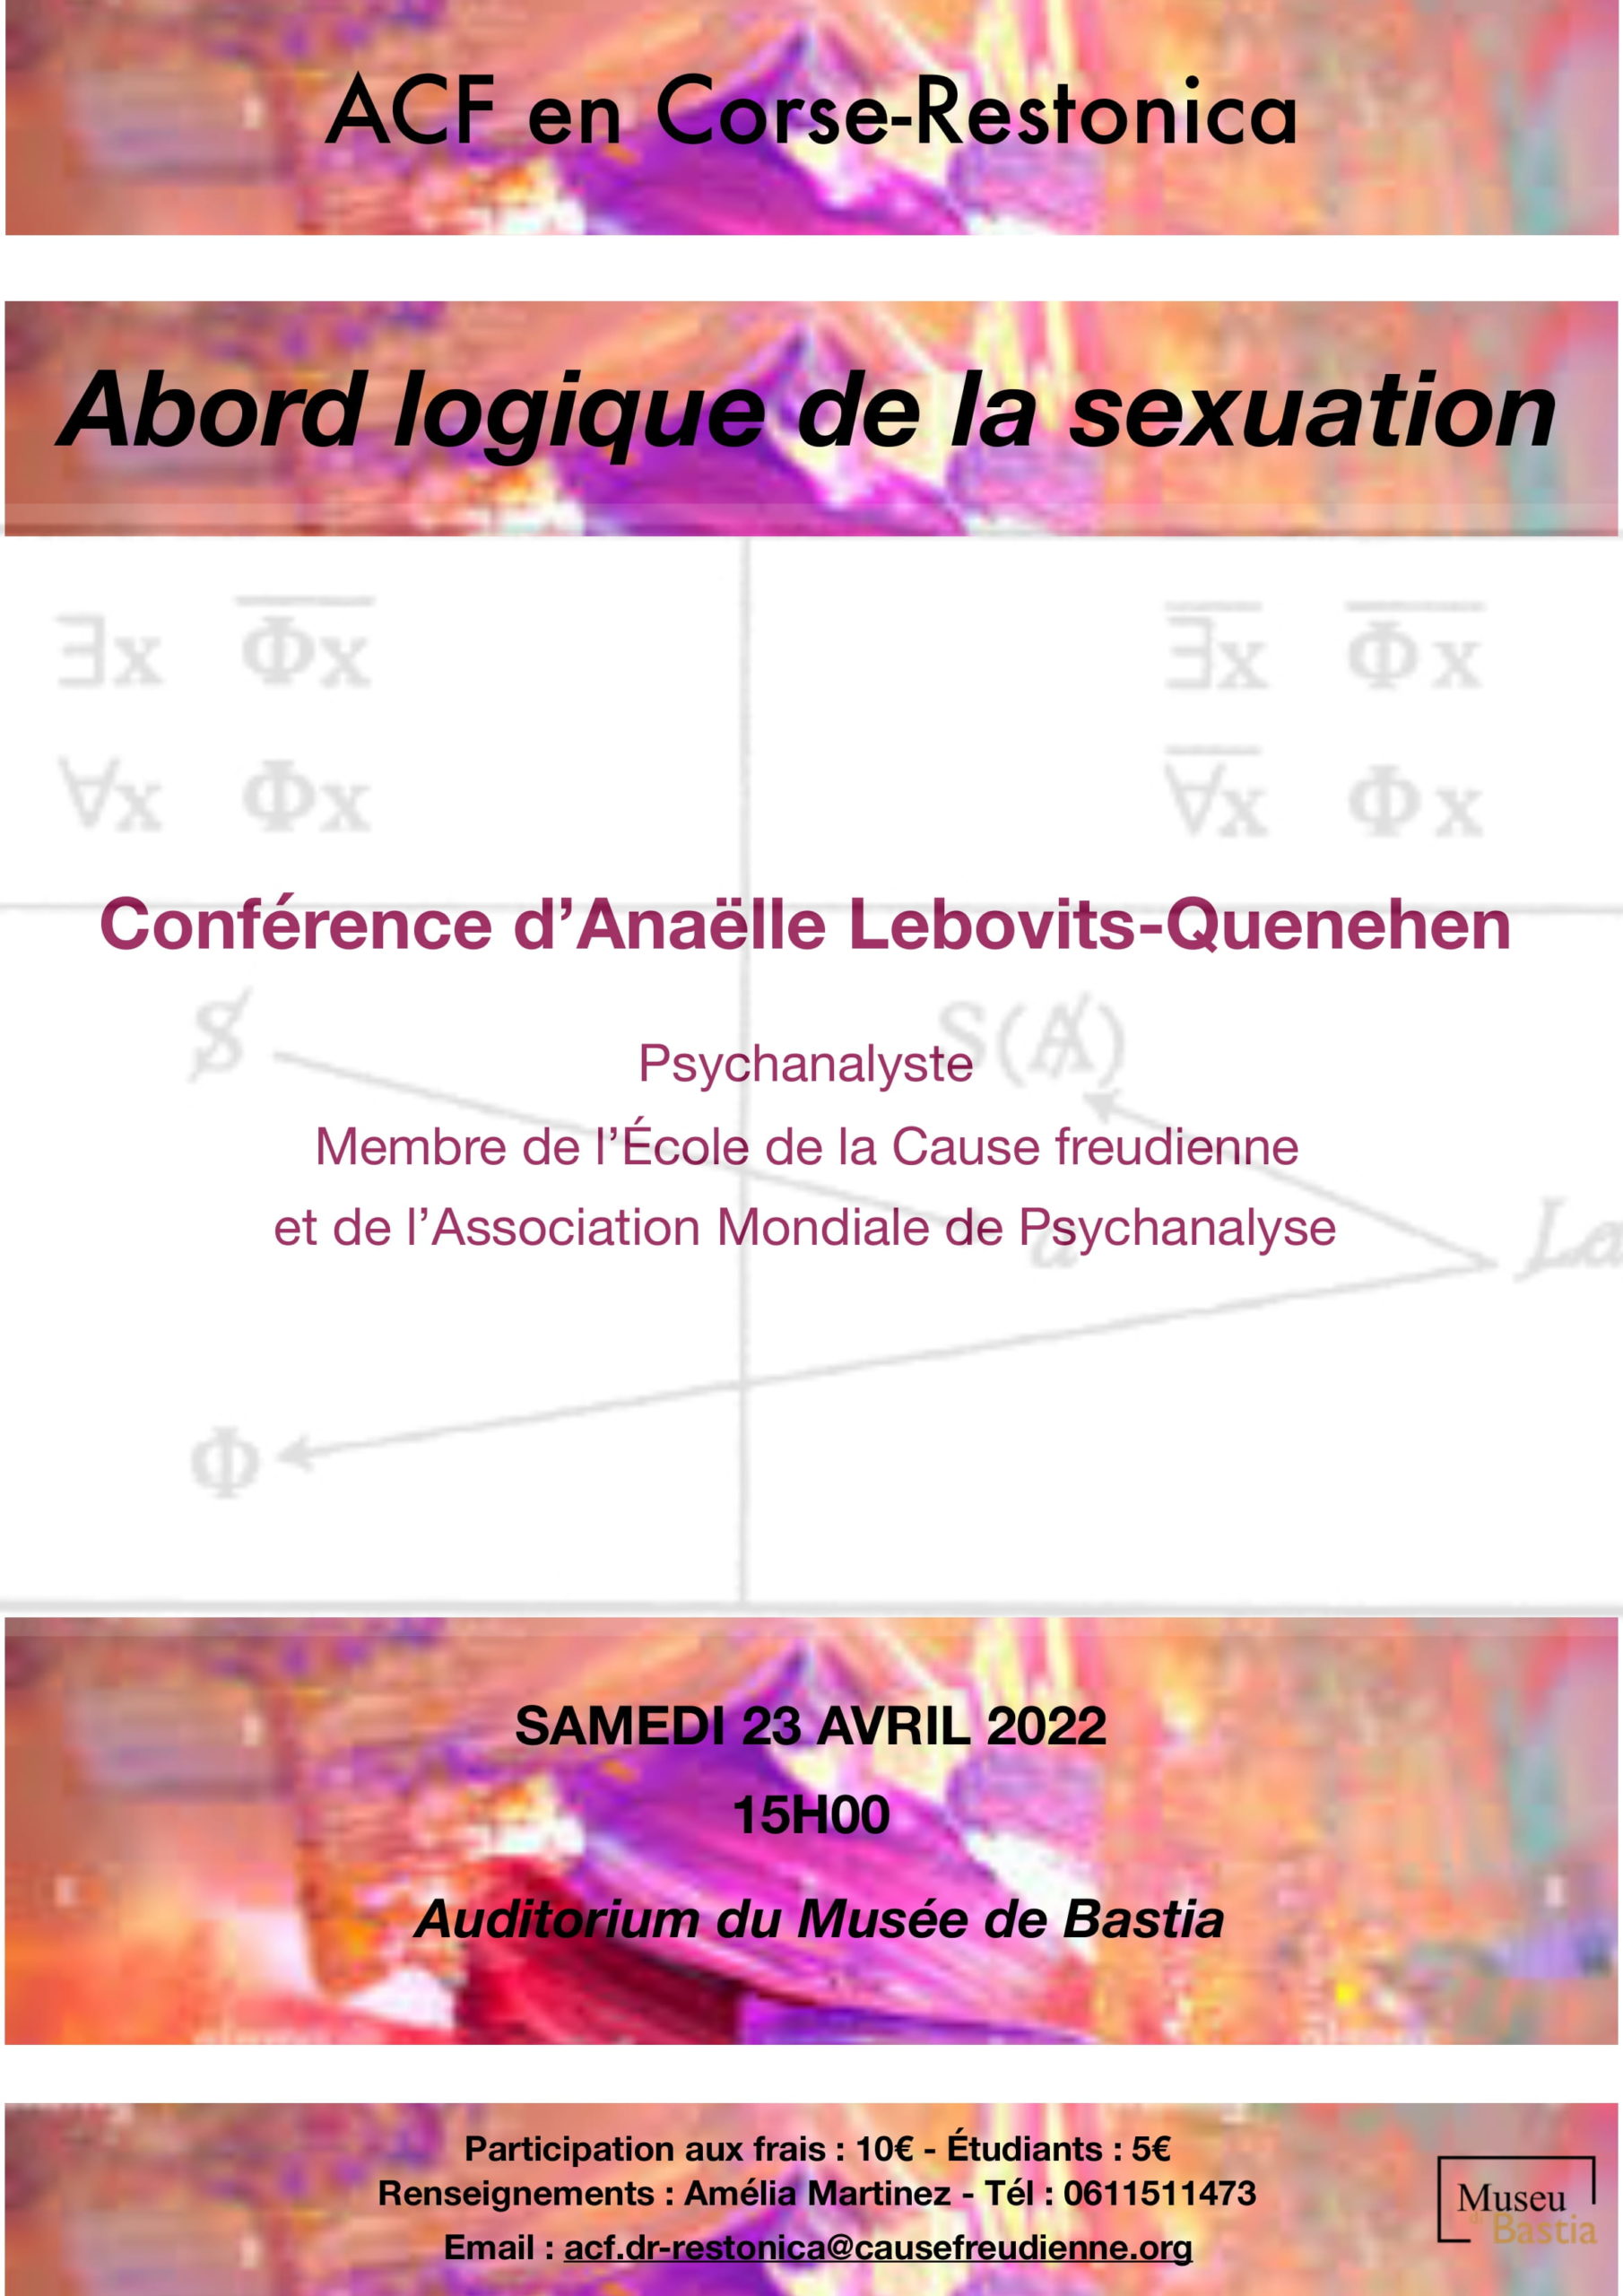 Conférence A. Lebovits-Quenehen – 23 avril 2022